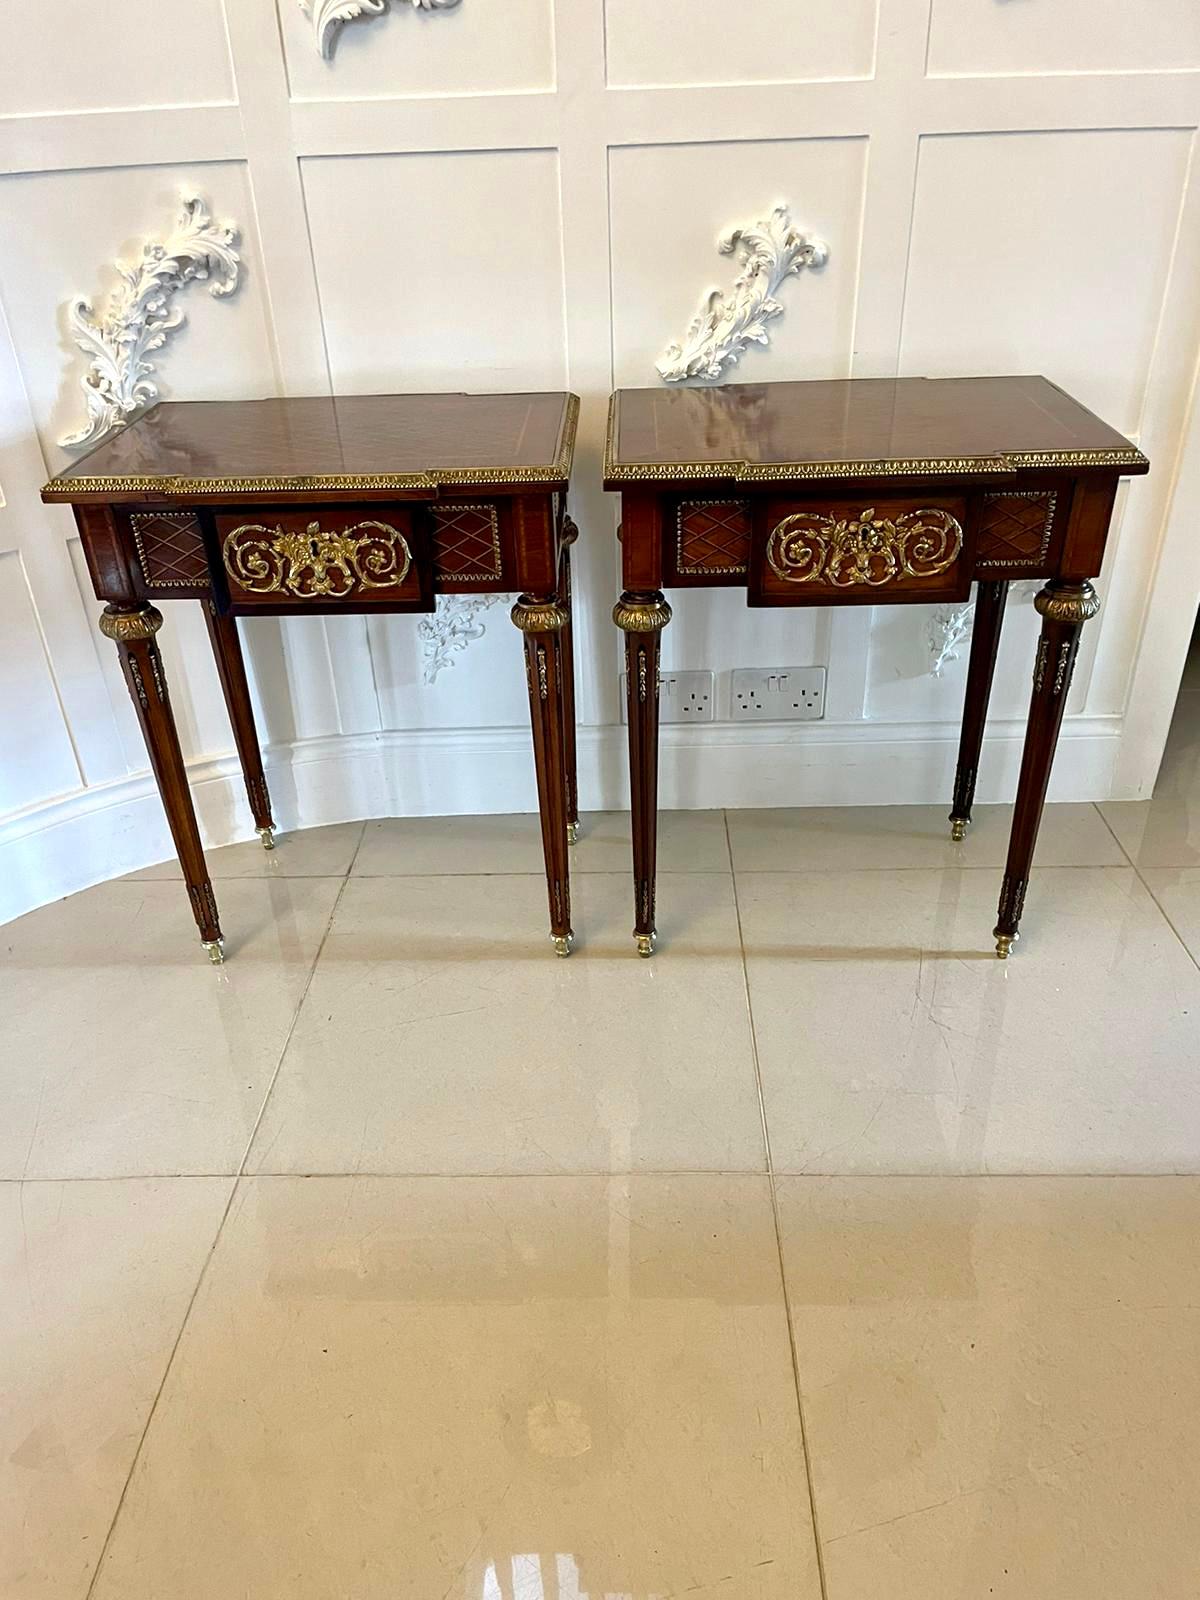 Pair of quality antique French kingwood freestanding lamp or bedside tables having a quality inlaid kingwood top with an ornate ormolu edge, inlaid freestanding frieze with a single drawer and ornate ormolu mounts standing on four turned tapering